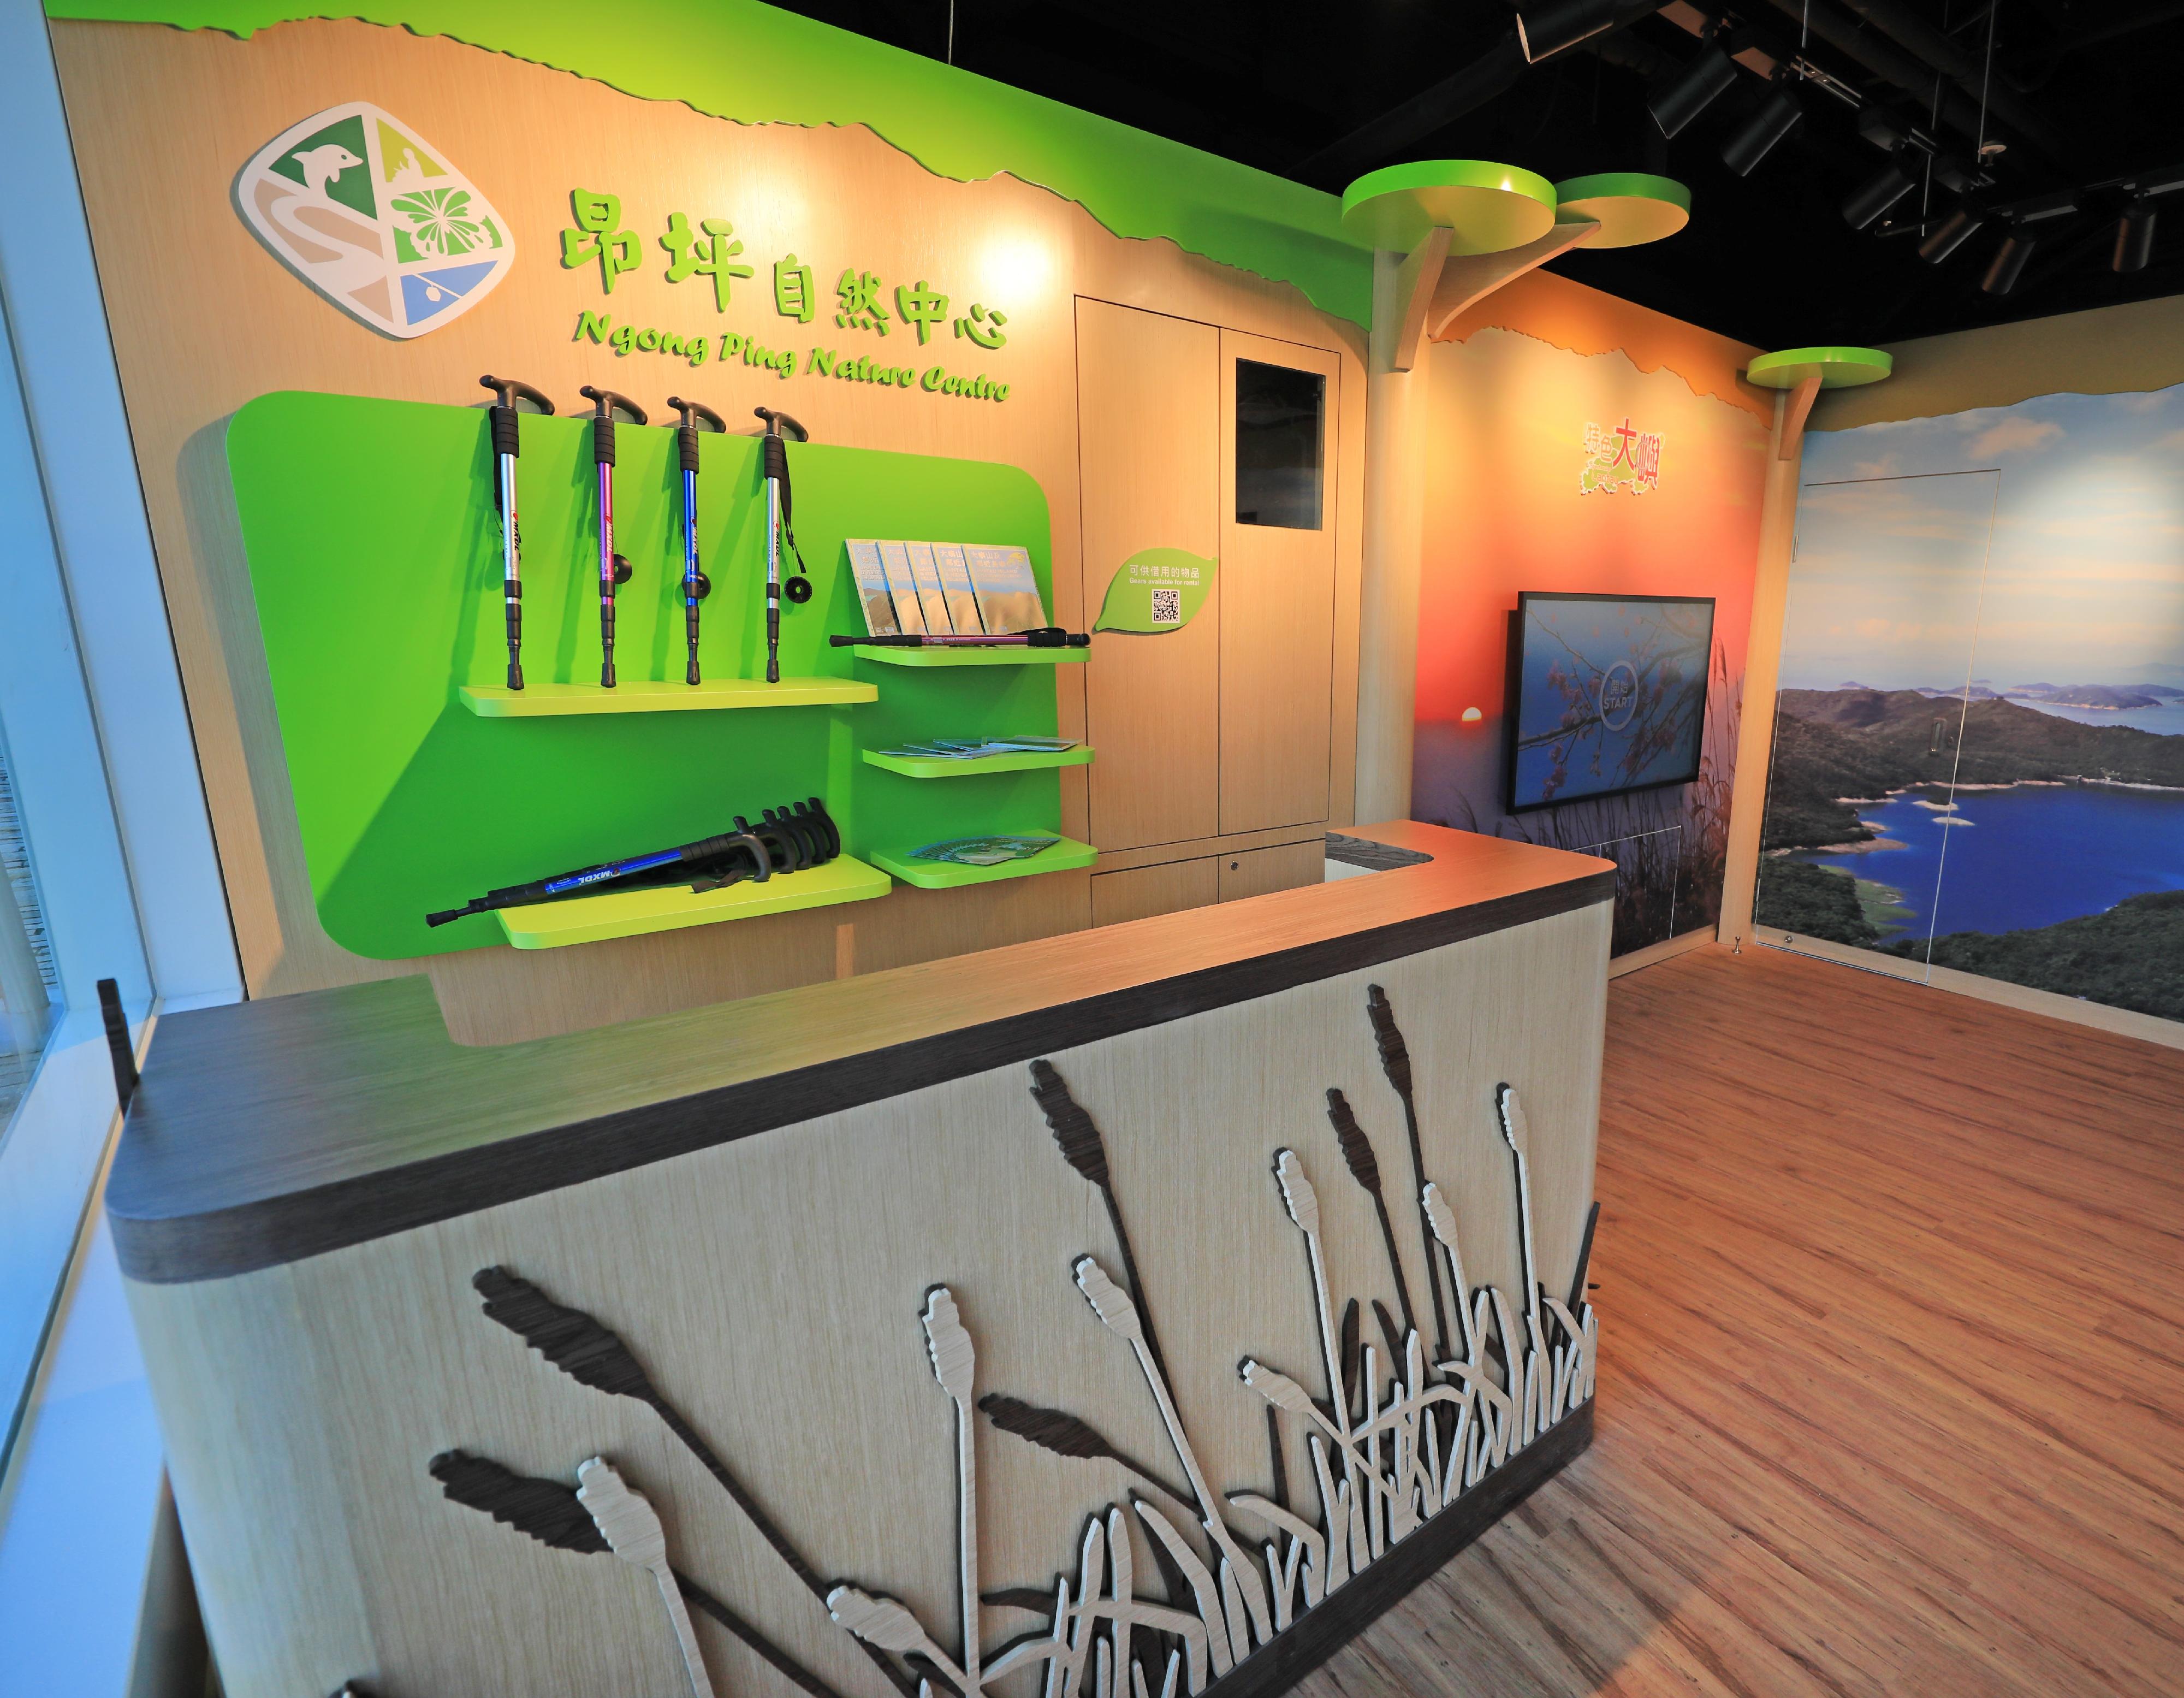 With the completion of renovation works, the Ngong Ping Nature Centre at Ngong Ping Village on Lantau Island reopened today (November 30). The Centre is introducing a new service of lending maps and hiking poles to facilitate excursions to nearby hiking trails.